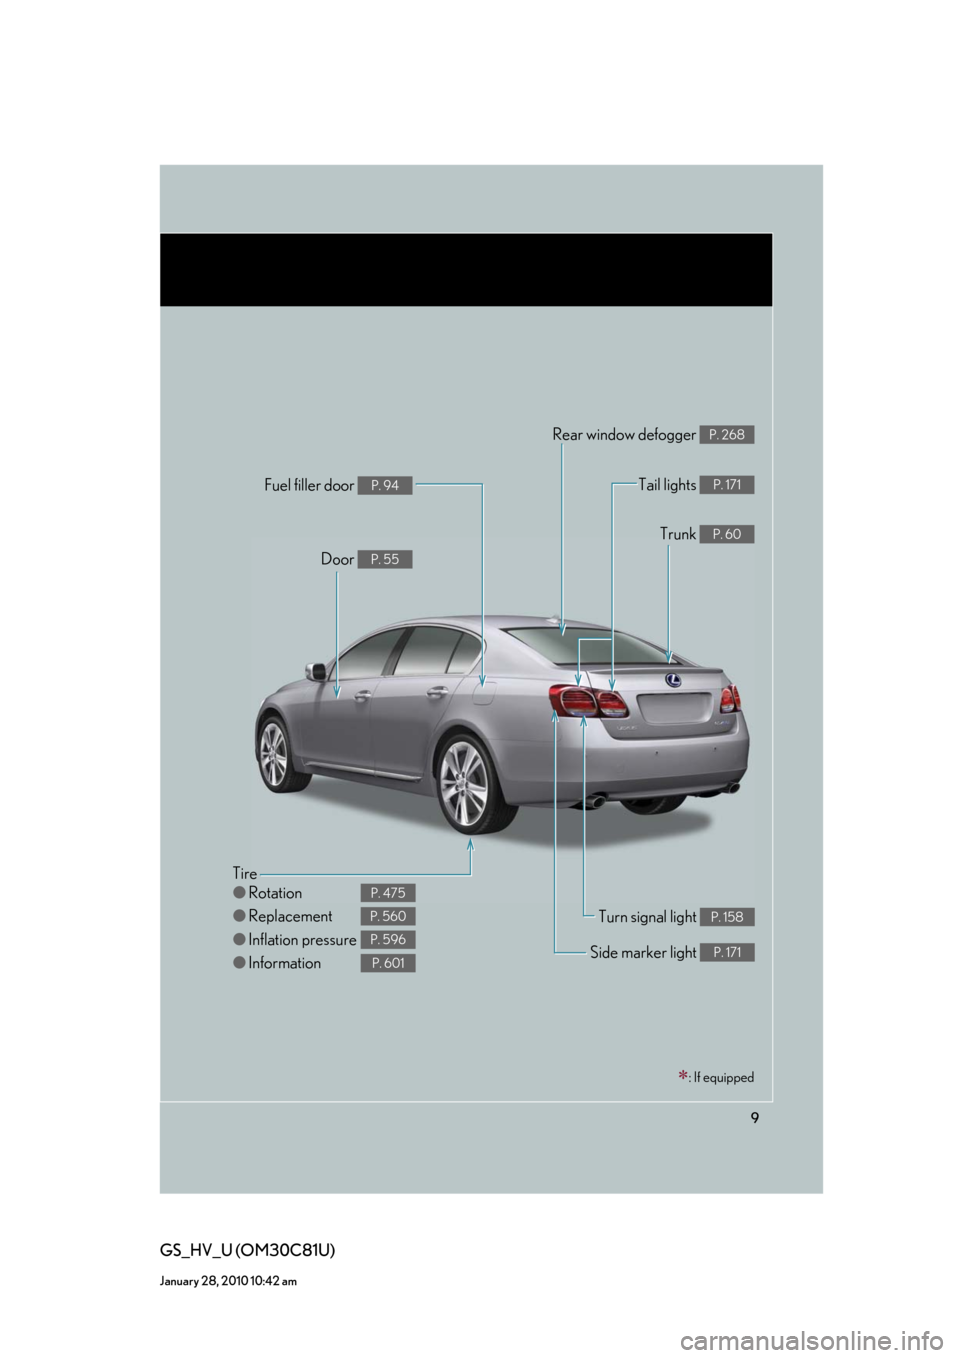 Lexus GS450h 2010  Using The Audio System / LEXUS 2010 GS450H OWNERS MANUAL (OM30C81U) 9
GS_HV_U (OM30C81U)
January 28, 2010 10:42 am
Tire
●Rotation
●Replacement
●Inflation pressure
●Information
P. 475
P. 560
P. 596
P. 601
Tail lights P. 171
Side marker light P. 171
Trunk P. 60
